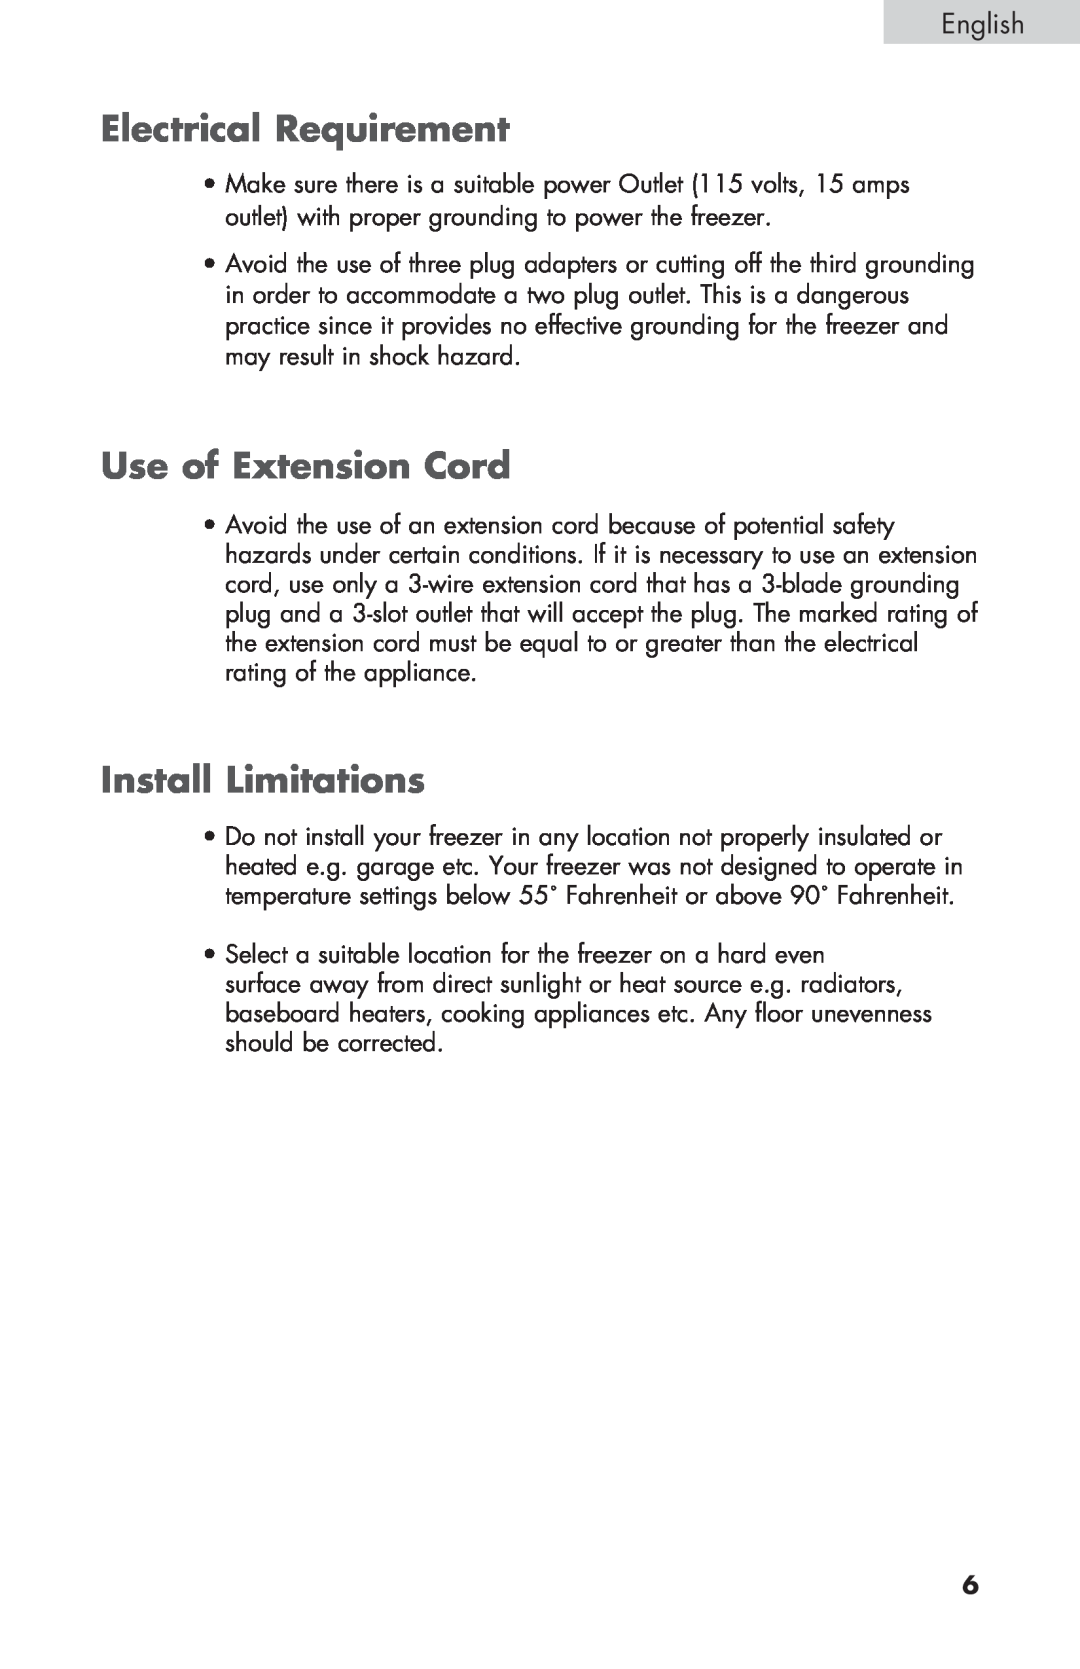 Haier ESCM050EC user manual Electrical Requirement, Use of Extension Cord, Install Limitations 